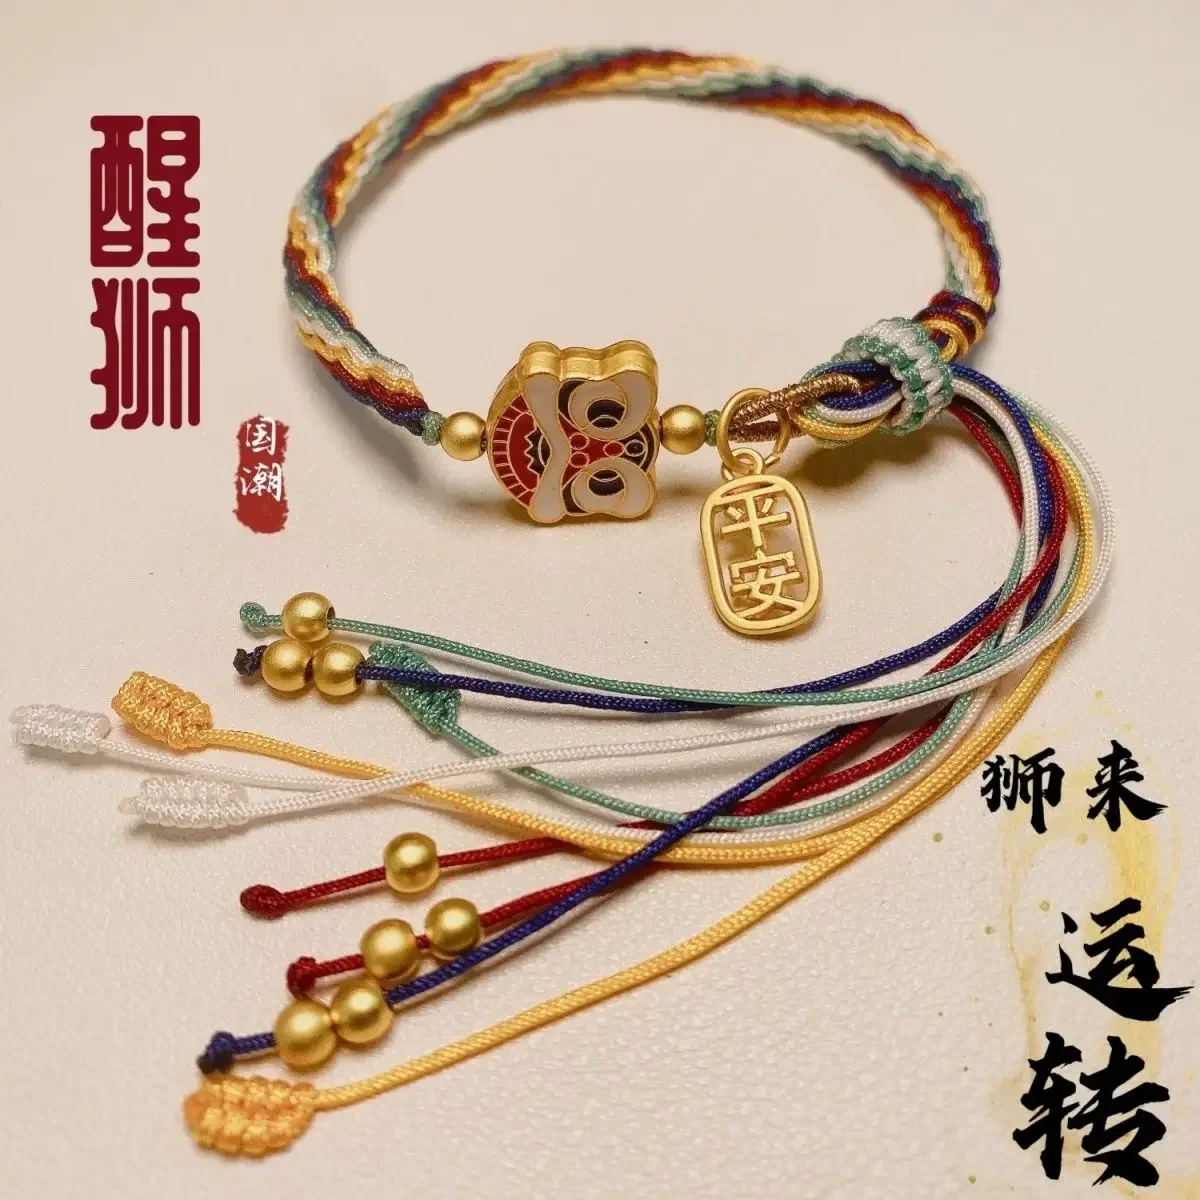 

Lion To Run Ins Small Chinese Fashion Lion Wake-up Bracelet Ping An Fu Brand Woven HandRope Gift For Men And Women To Make Money